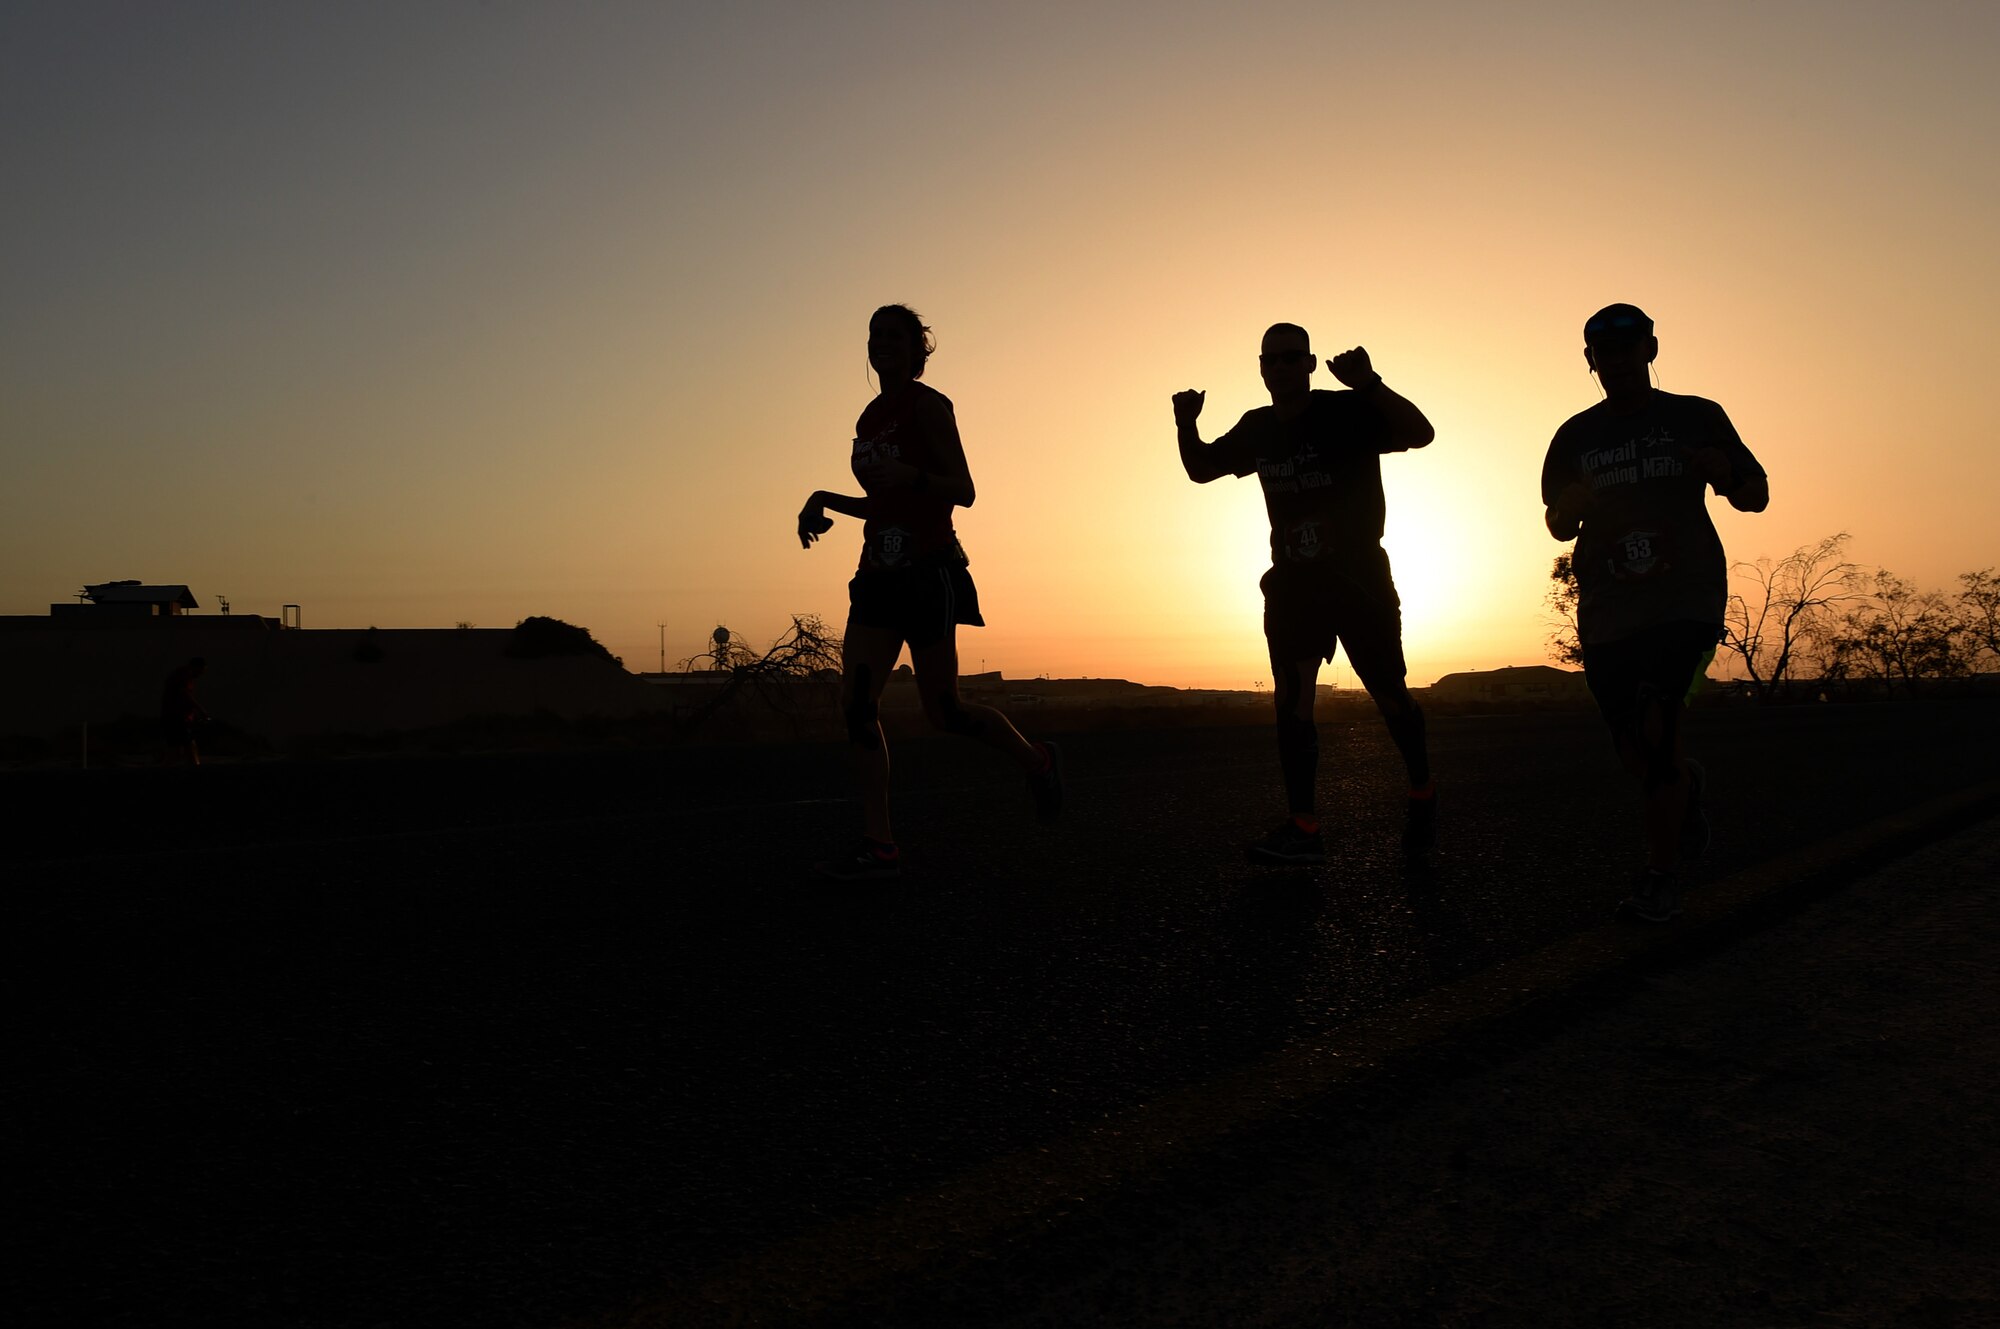 Military service members cheer as they approach the half-way point of the 40th Annual U.S. Marine Corps Marathon-Forward at an undisclosed location in Southwest Asia, Oct. 25, 2015. The official marathon which was held in Virginia and Washington D.C., began in October 1975 and aims to promote physical fitness as well as foster goodwill in the community and showcase the organizational skills of the U.S. Marine Corps. (U.S. Air Force photo by Staff Sgt. Jerilyn Quintanilla/Released) 